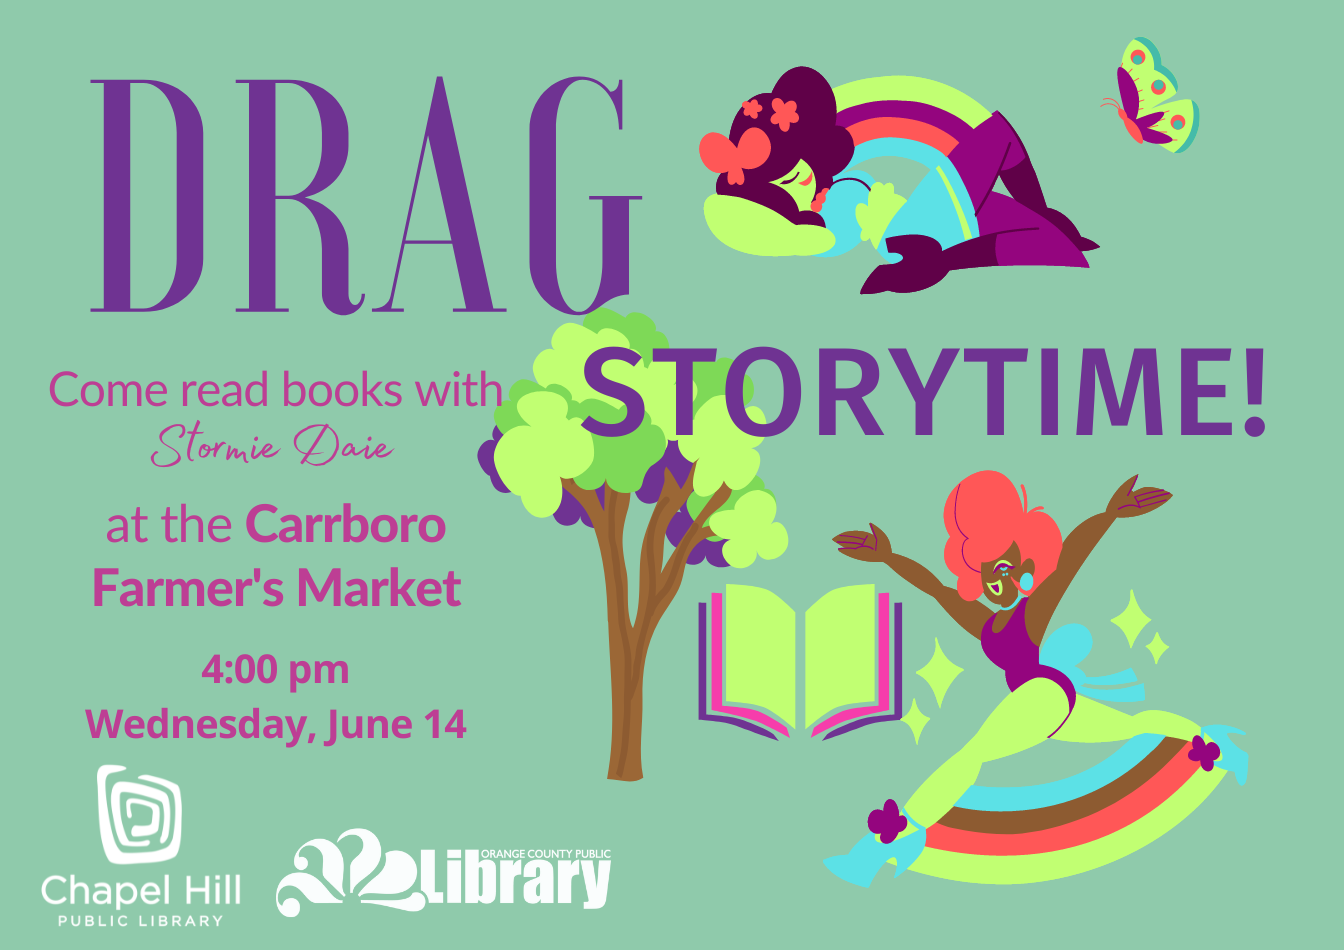 Drag Storytime! Come read books with Stormie Daie at the Carrboro Farmer's Market on Wednesday, June 14.